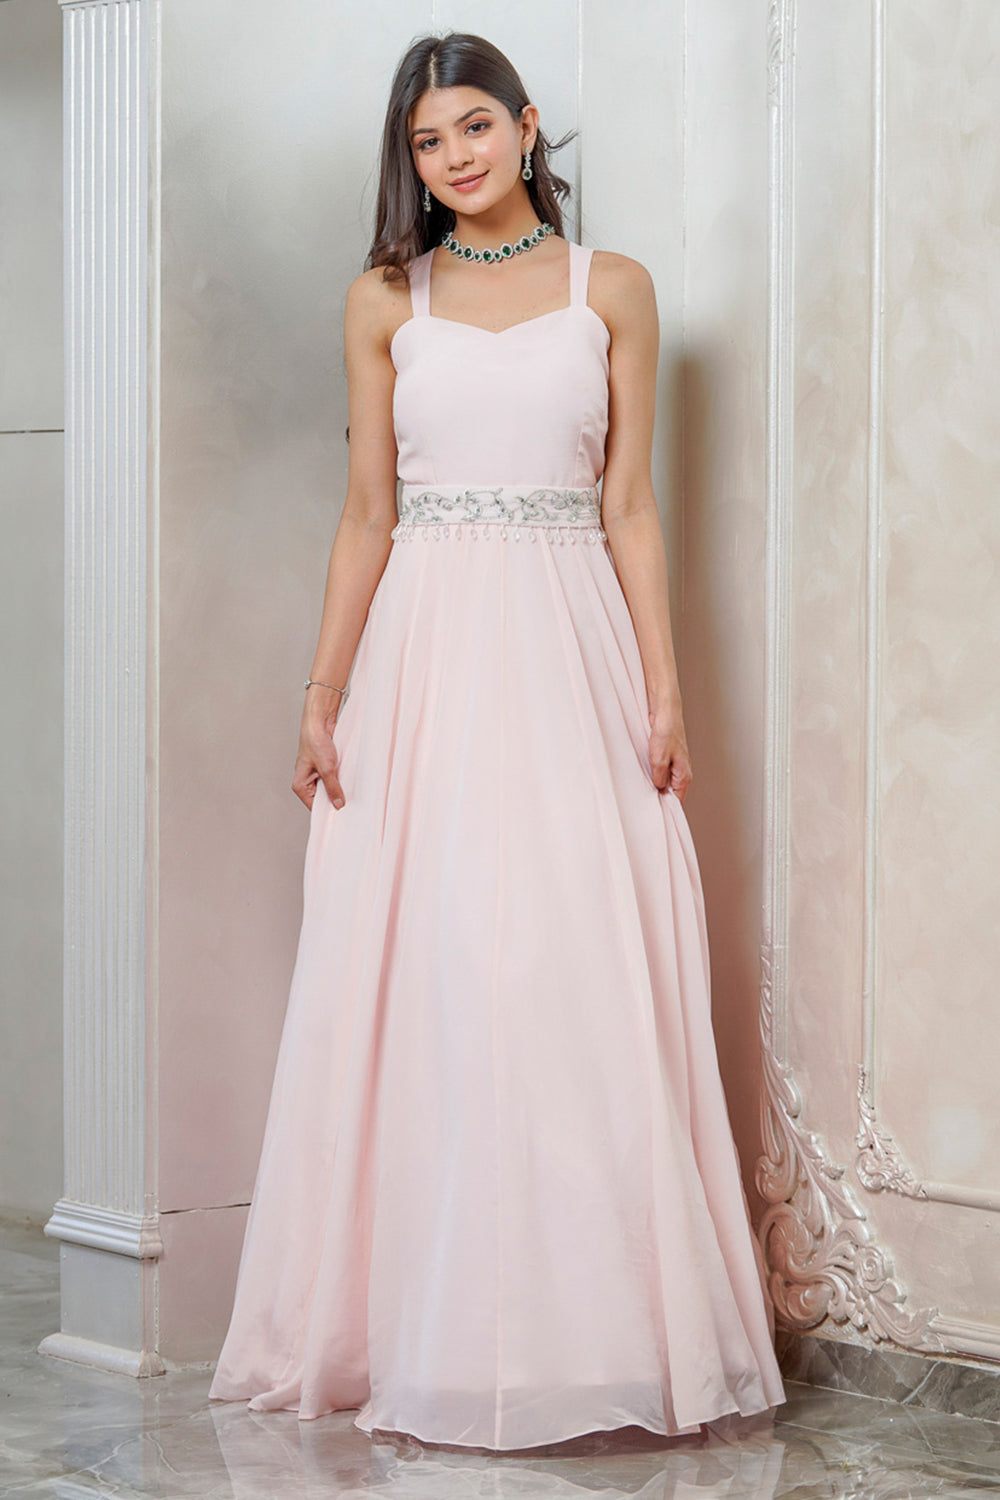 BABY PINK SWEETHEART NECK FLARED GOWN WITH BELT (7559100989686)